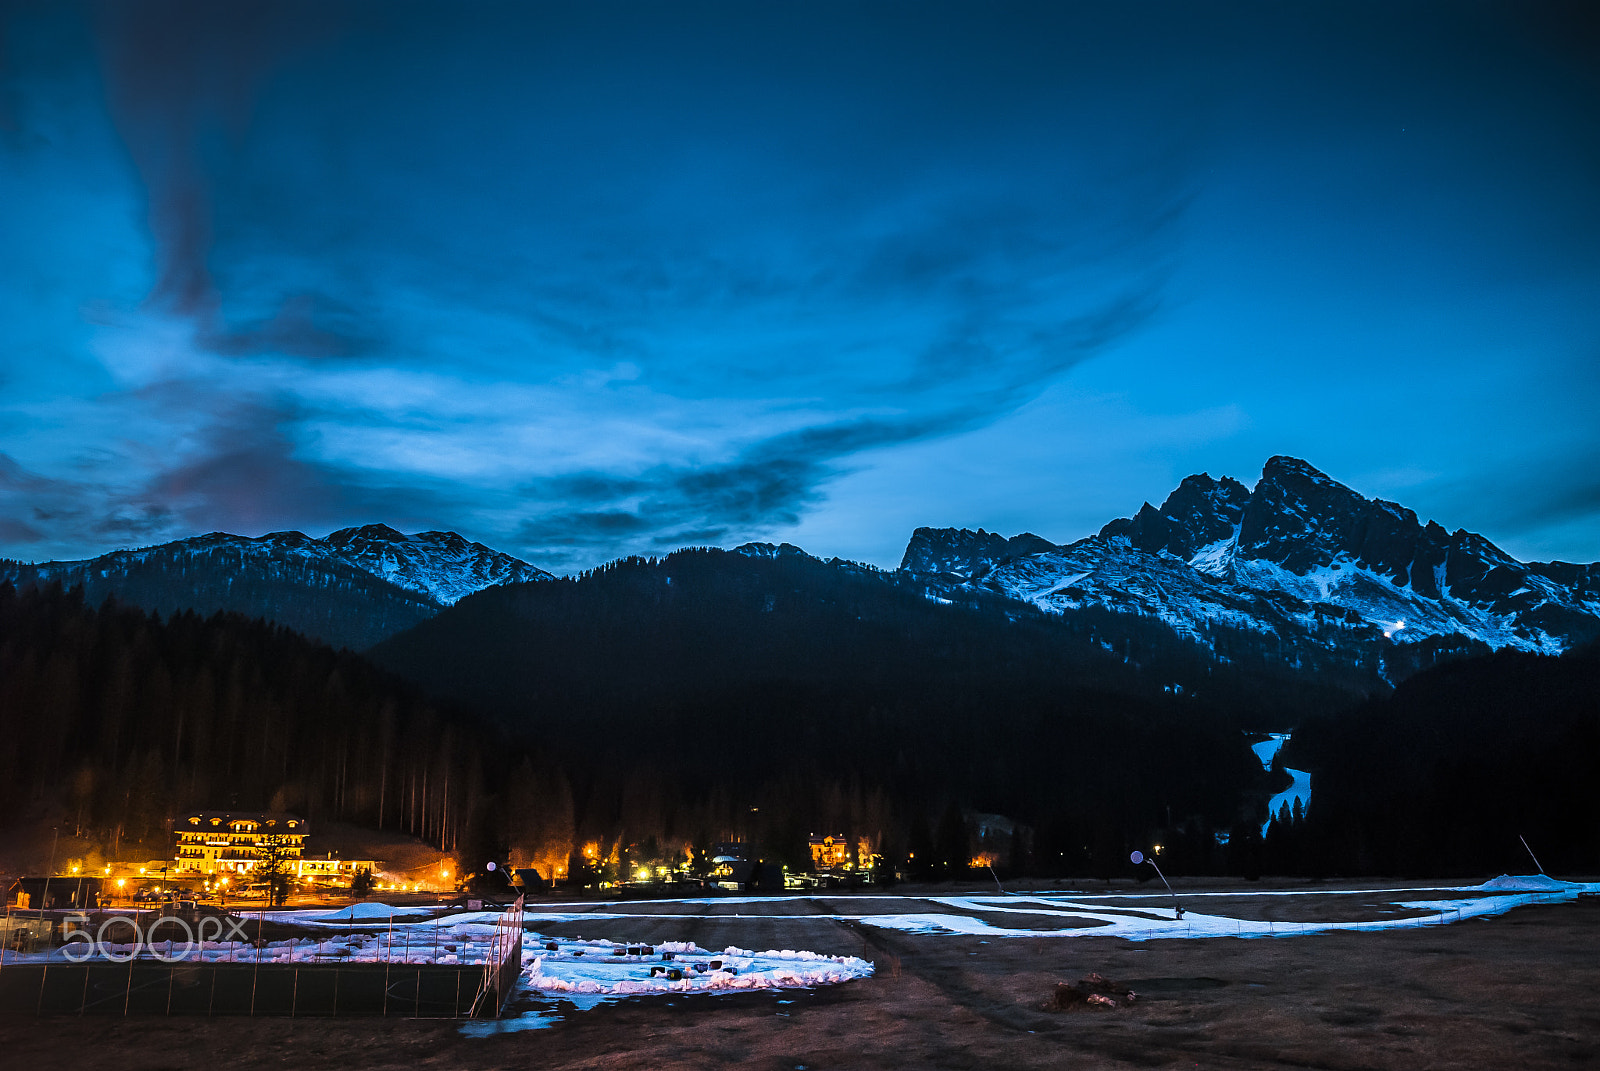 Nikon D80 + Tamron SP AF 17-50mm F2.8 XR Di II VC LD Aspherical (IF) sample photo. Blue hour in san martino di castrozza photography